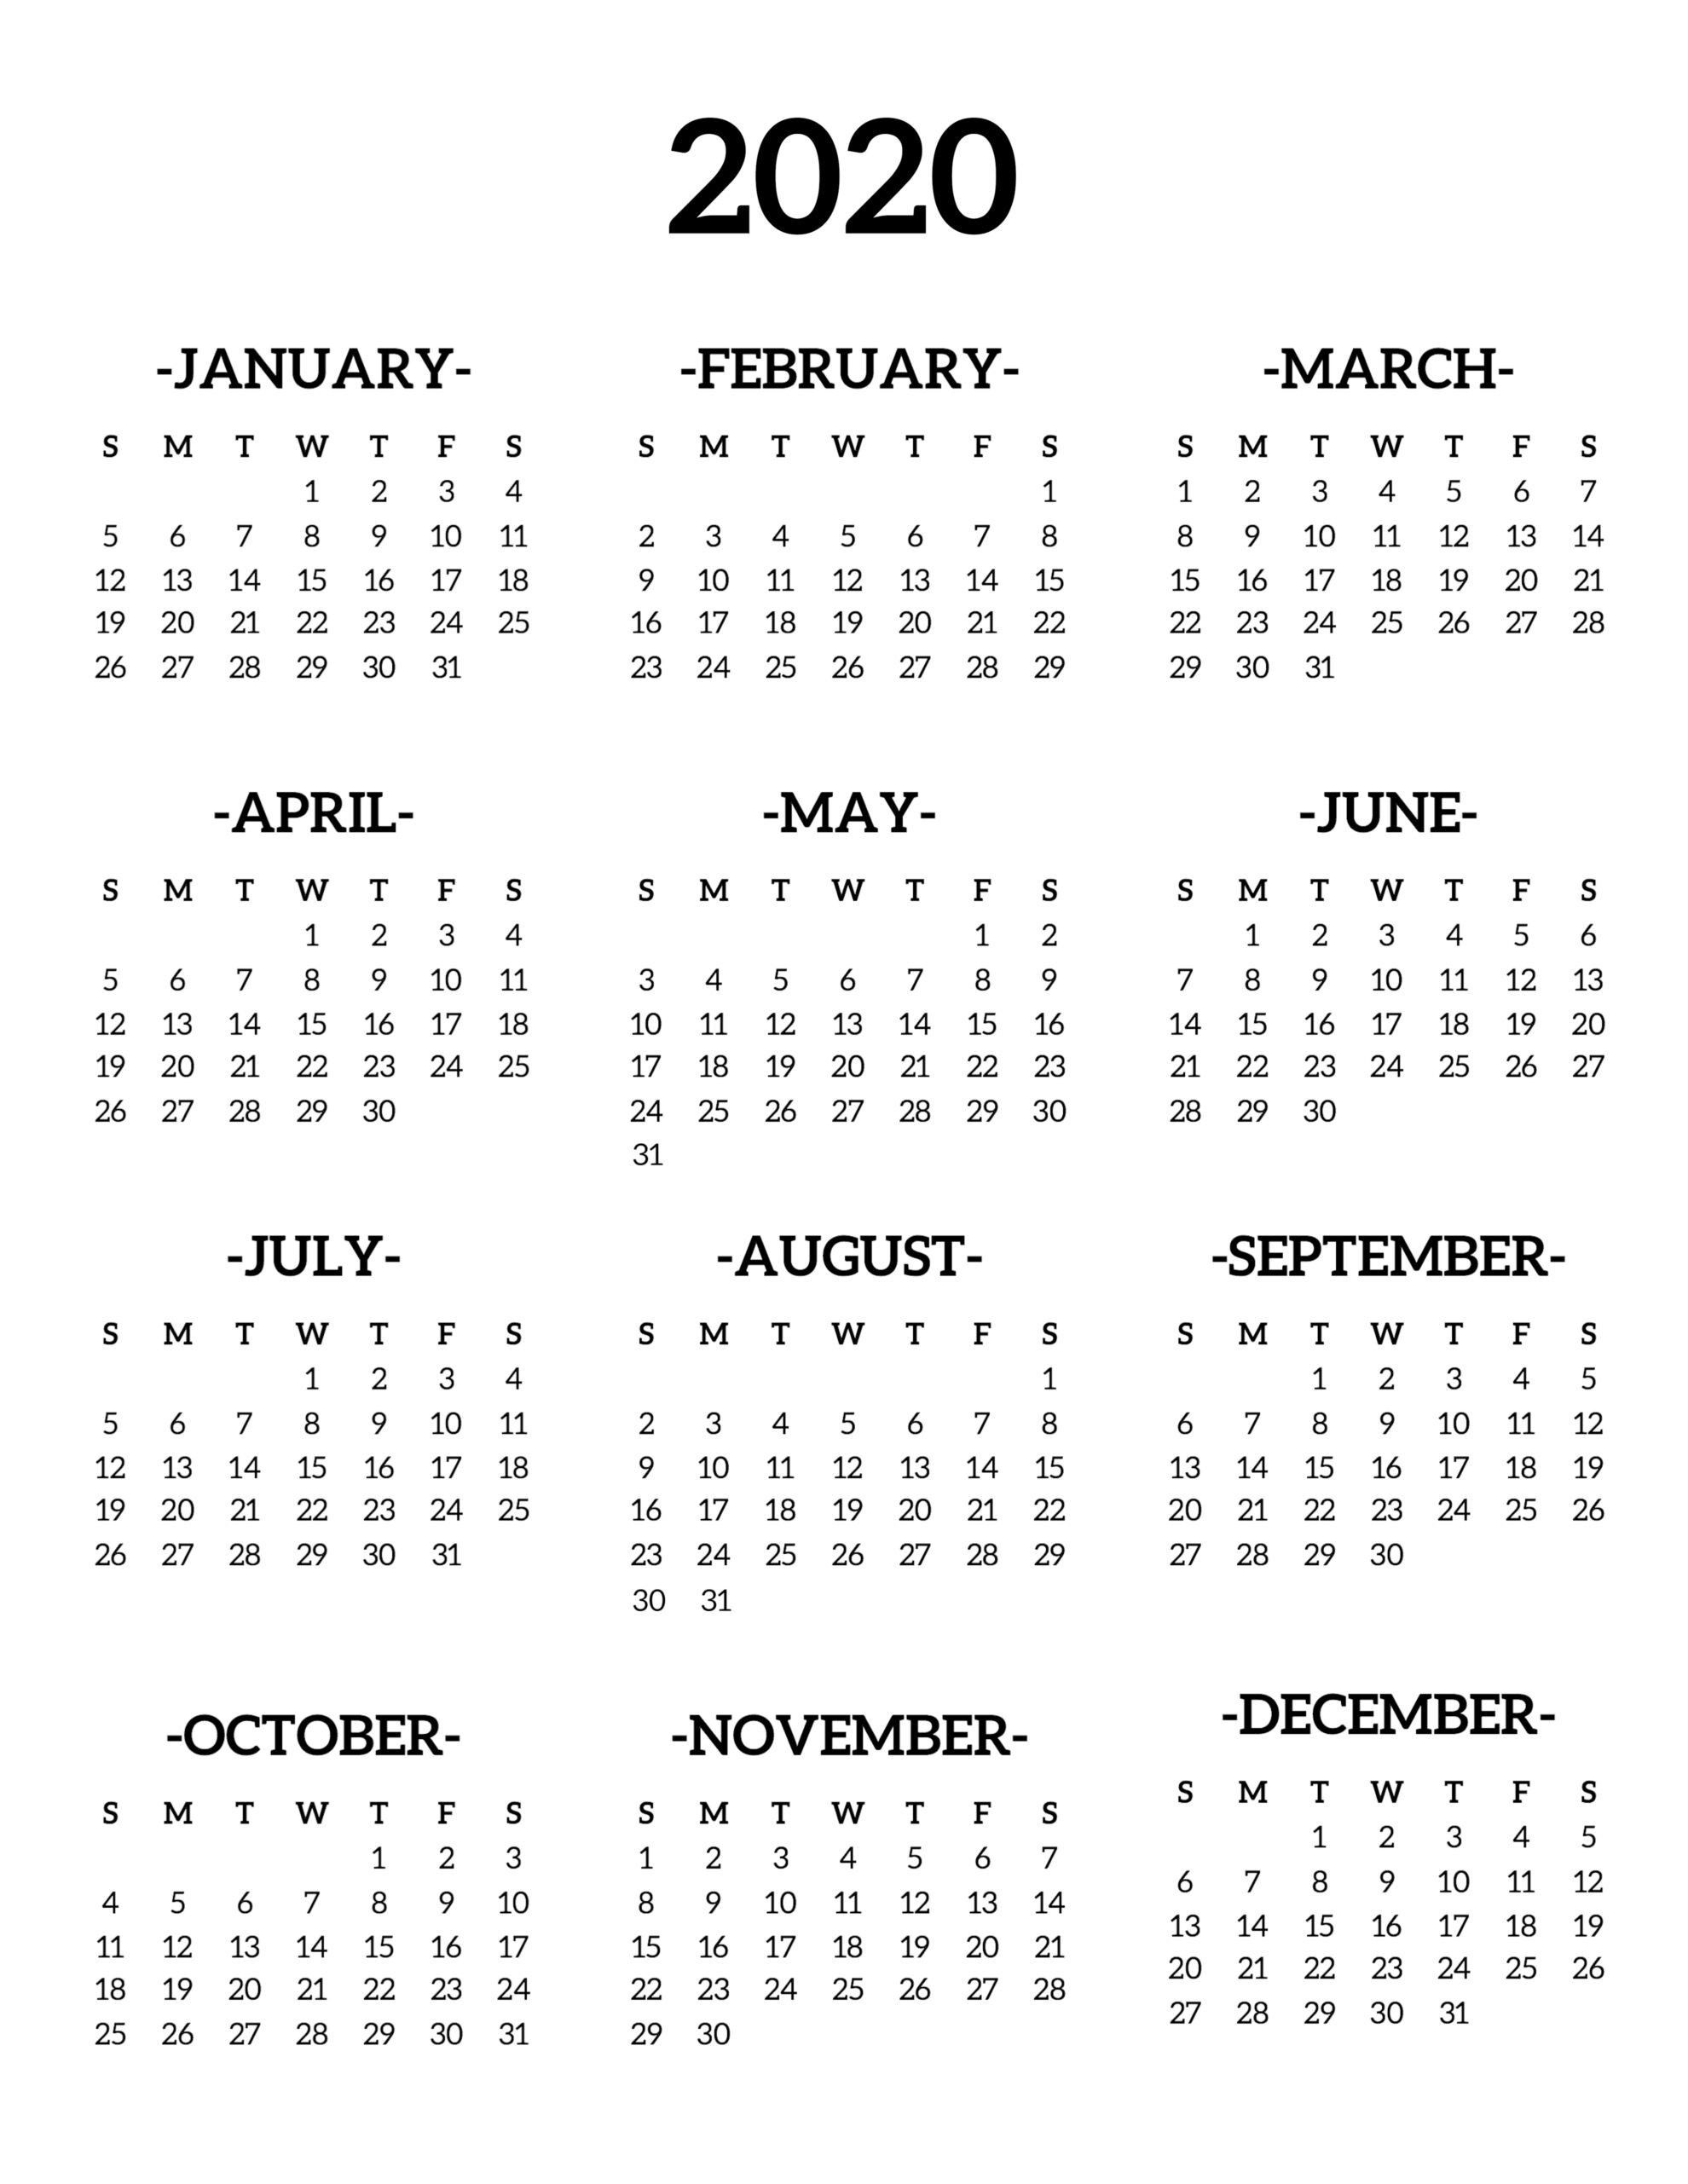 Calendar 2020 Printable E Page Paper Trail Design Free Blank inside 2020 Blank Calendar Pages